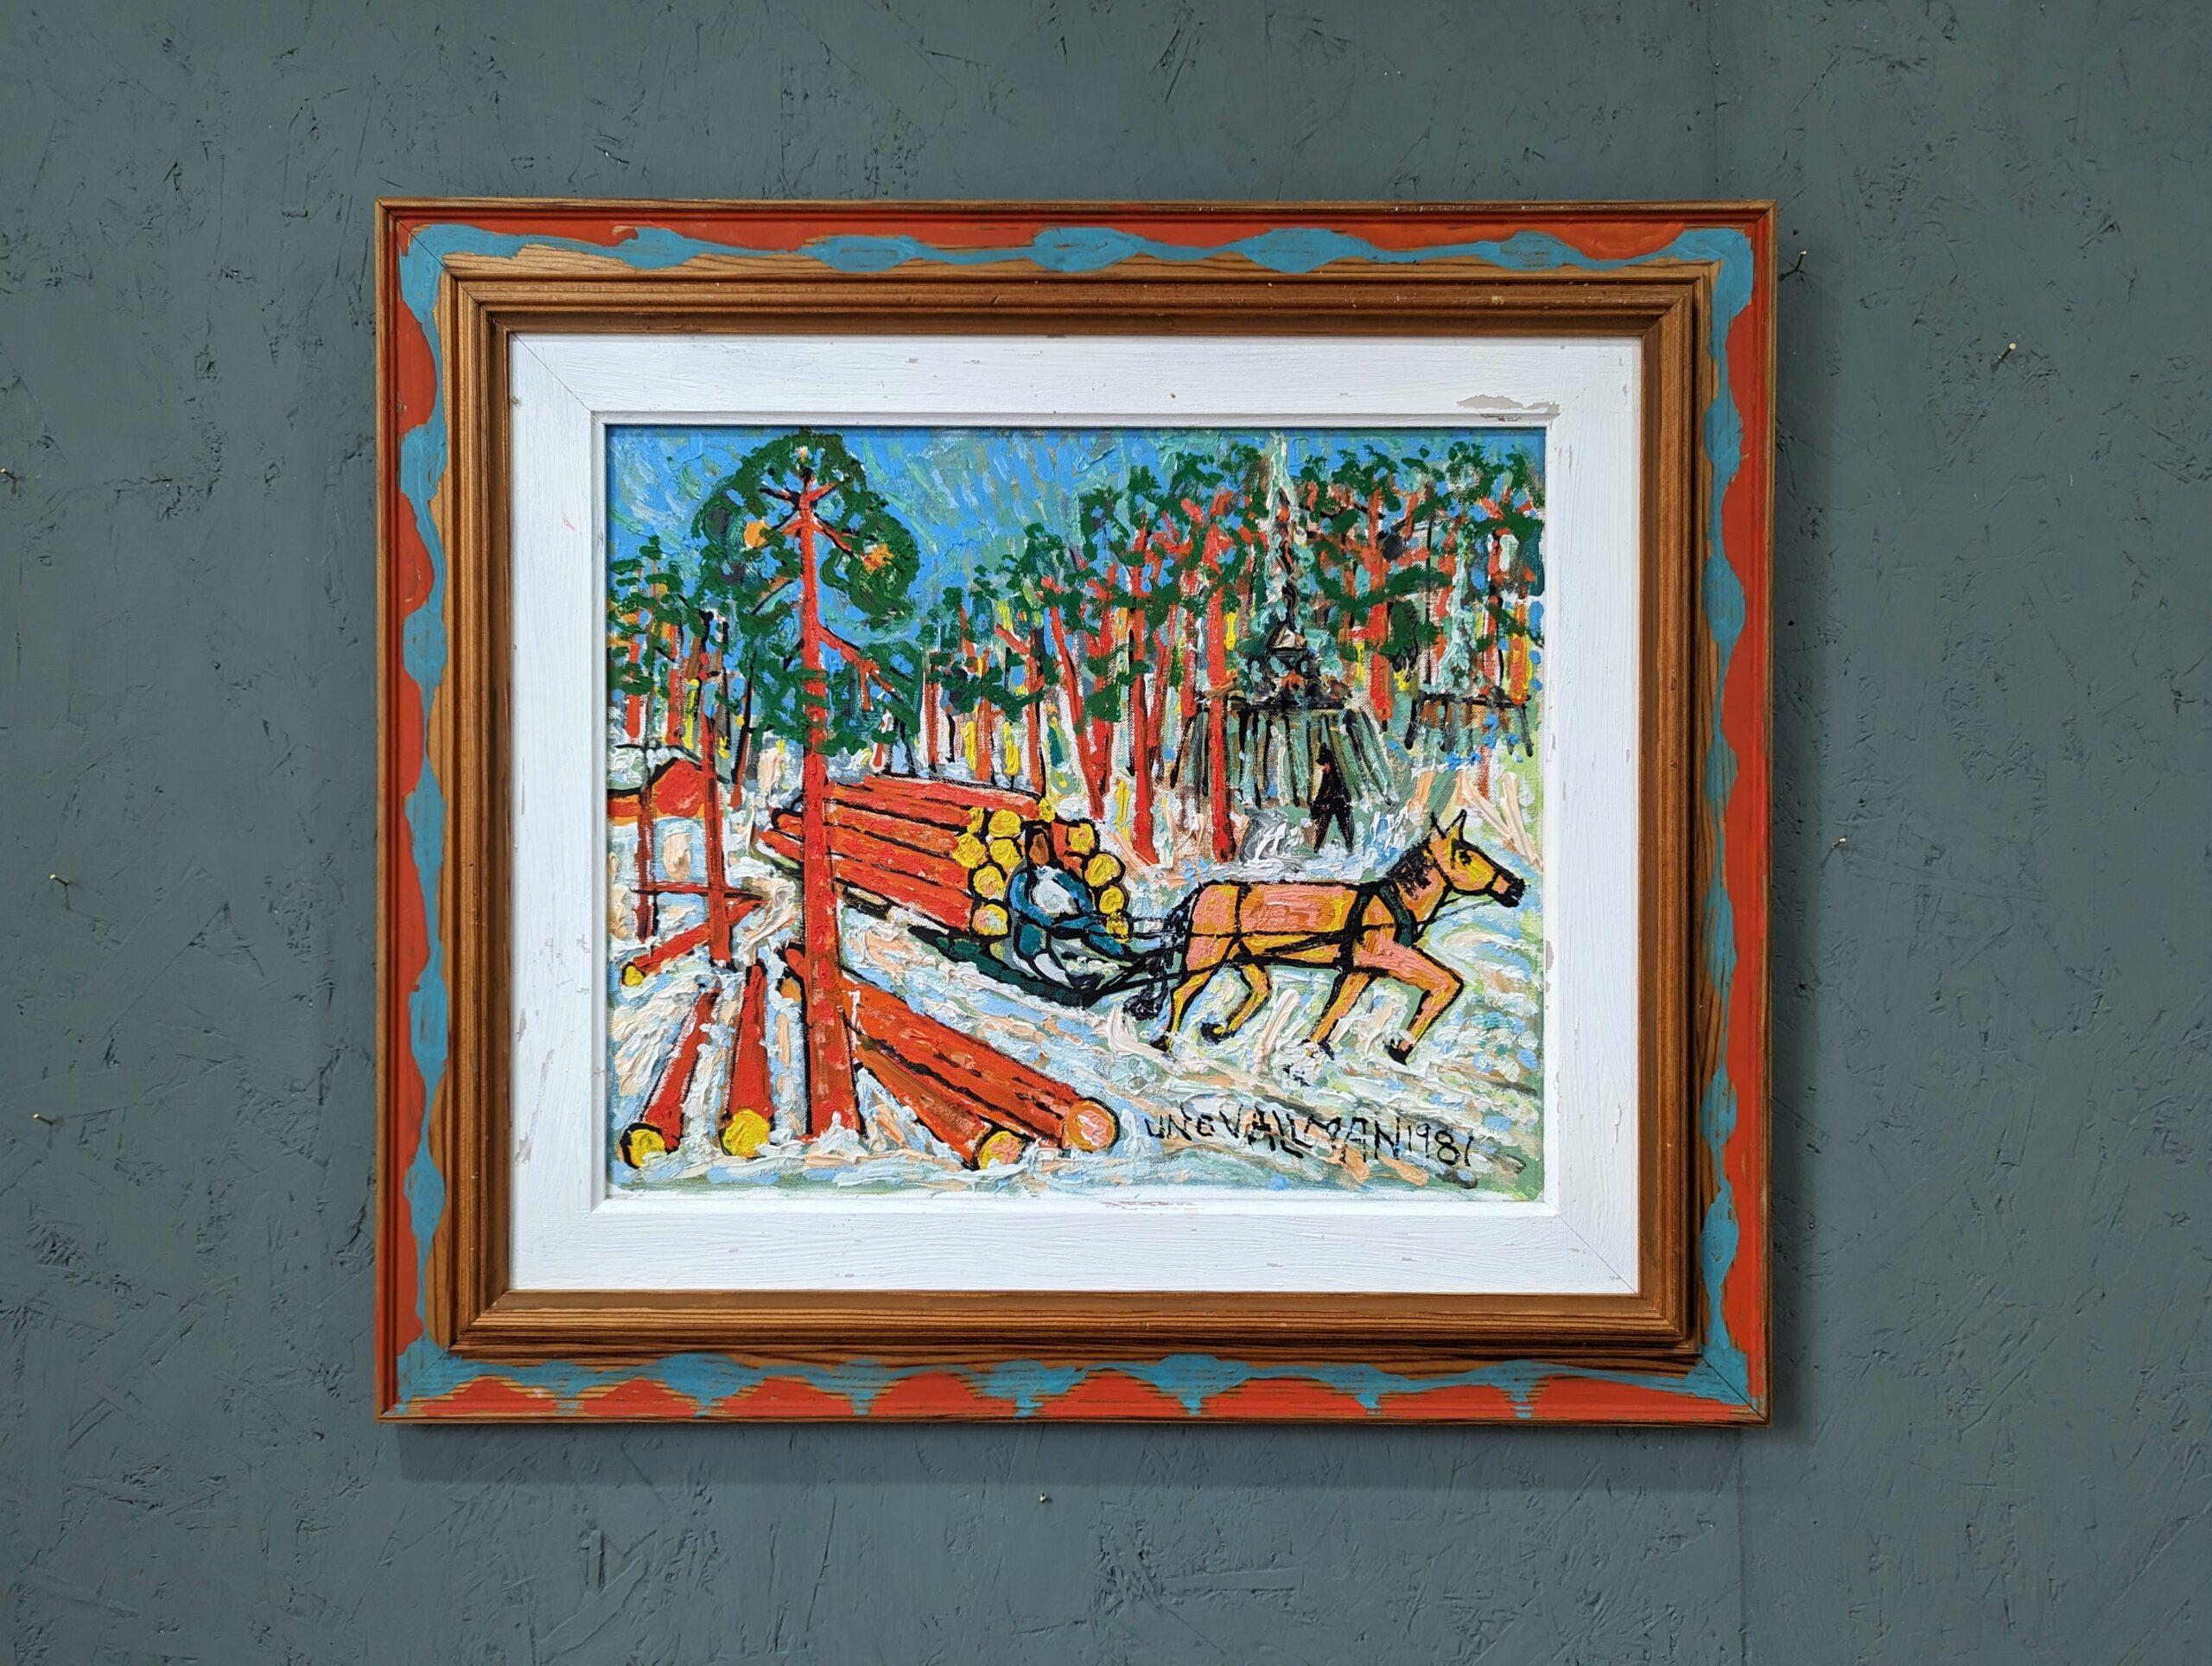 THE SLEIGH
Size: 58.5 x 66.5 cm (including frame)
Oil on canvas

A lively and energetic winter landscape composition, executed in oil onto canvas and dated 1981 by Swedish artist Uno Vallman (1913-2004) whose works are included in the Swedish